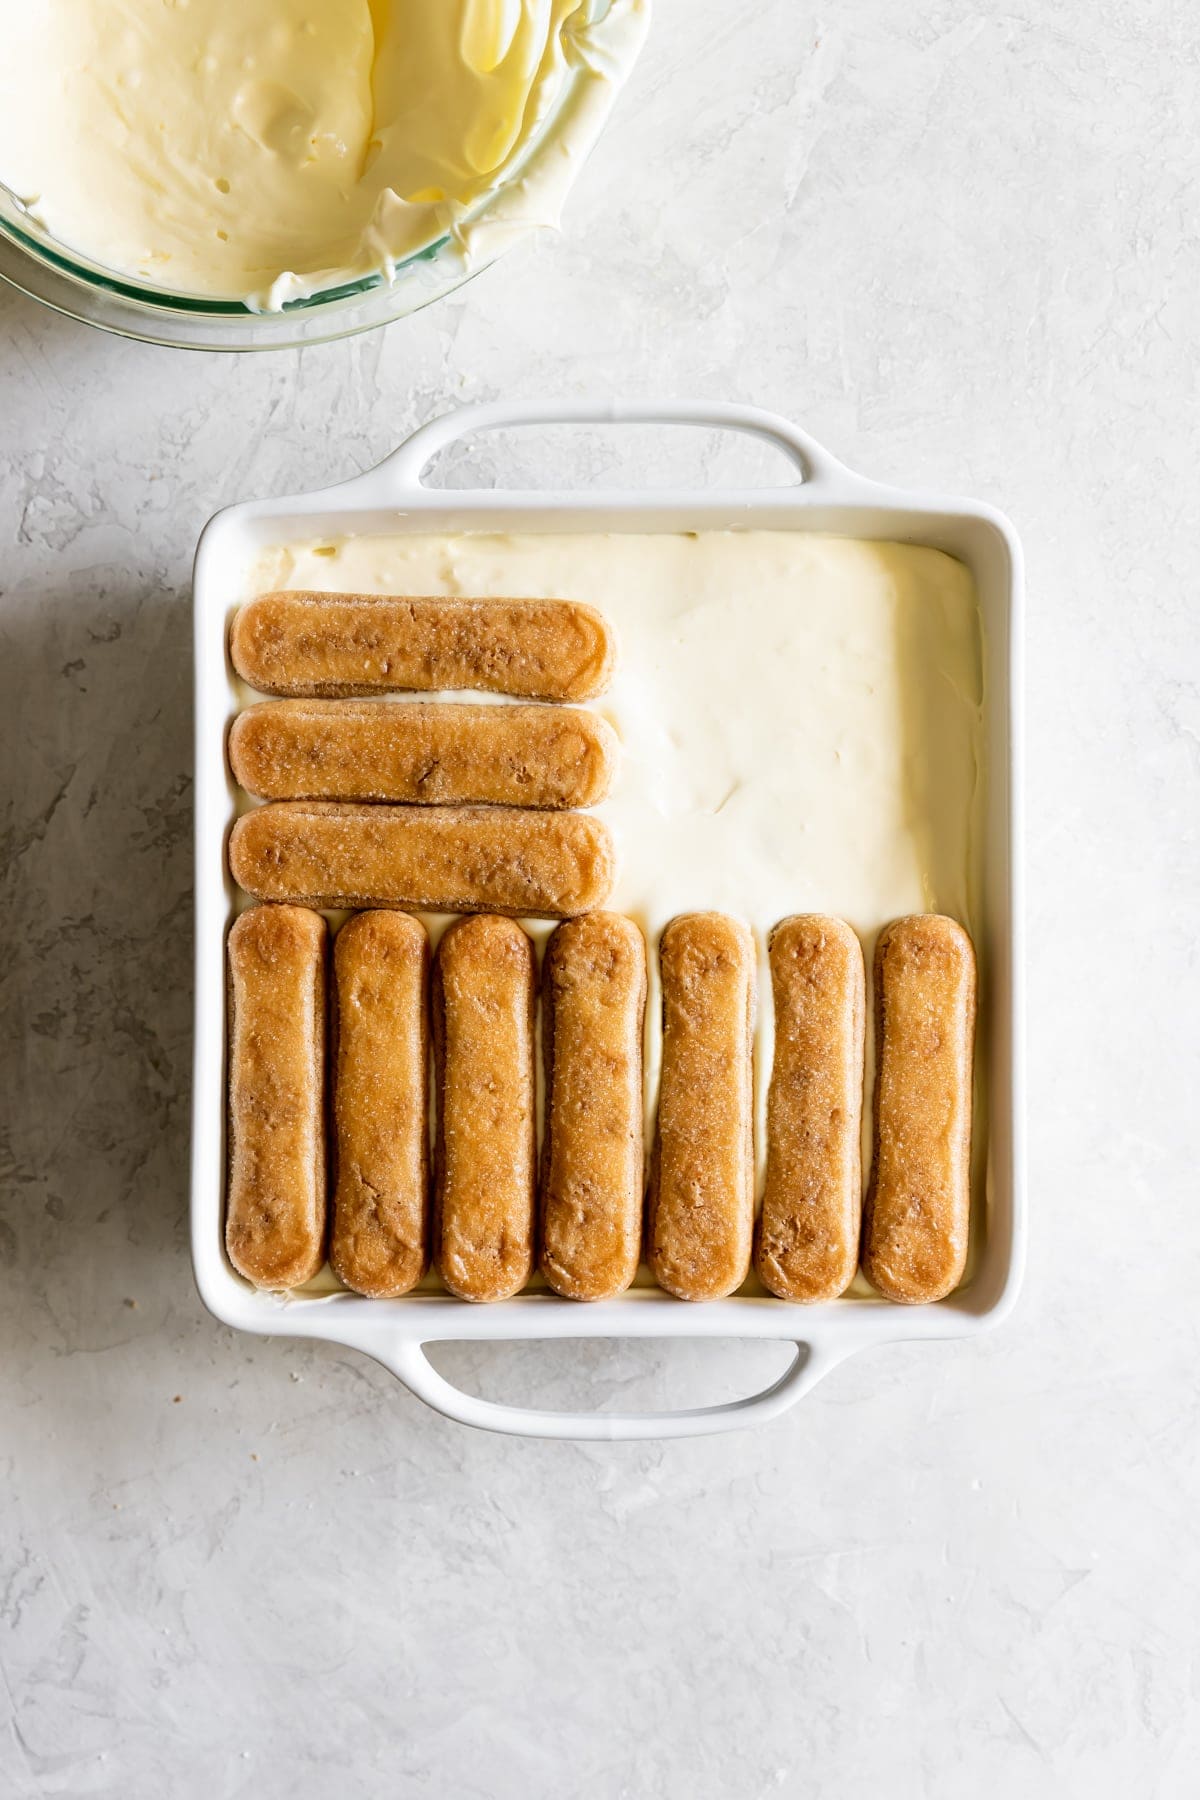 layers of mascarpone filling and espresso-soaked ladyfingers in a baking dish